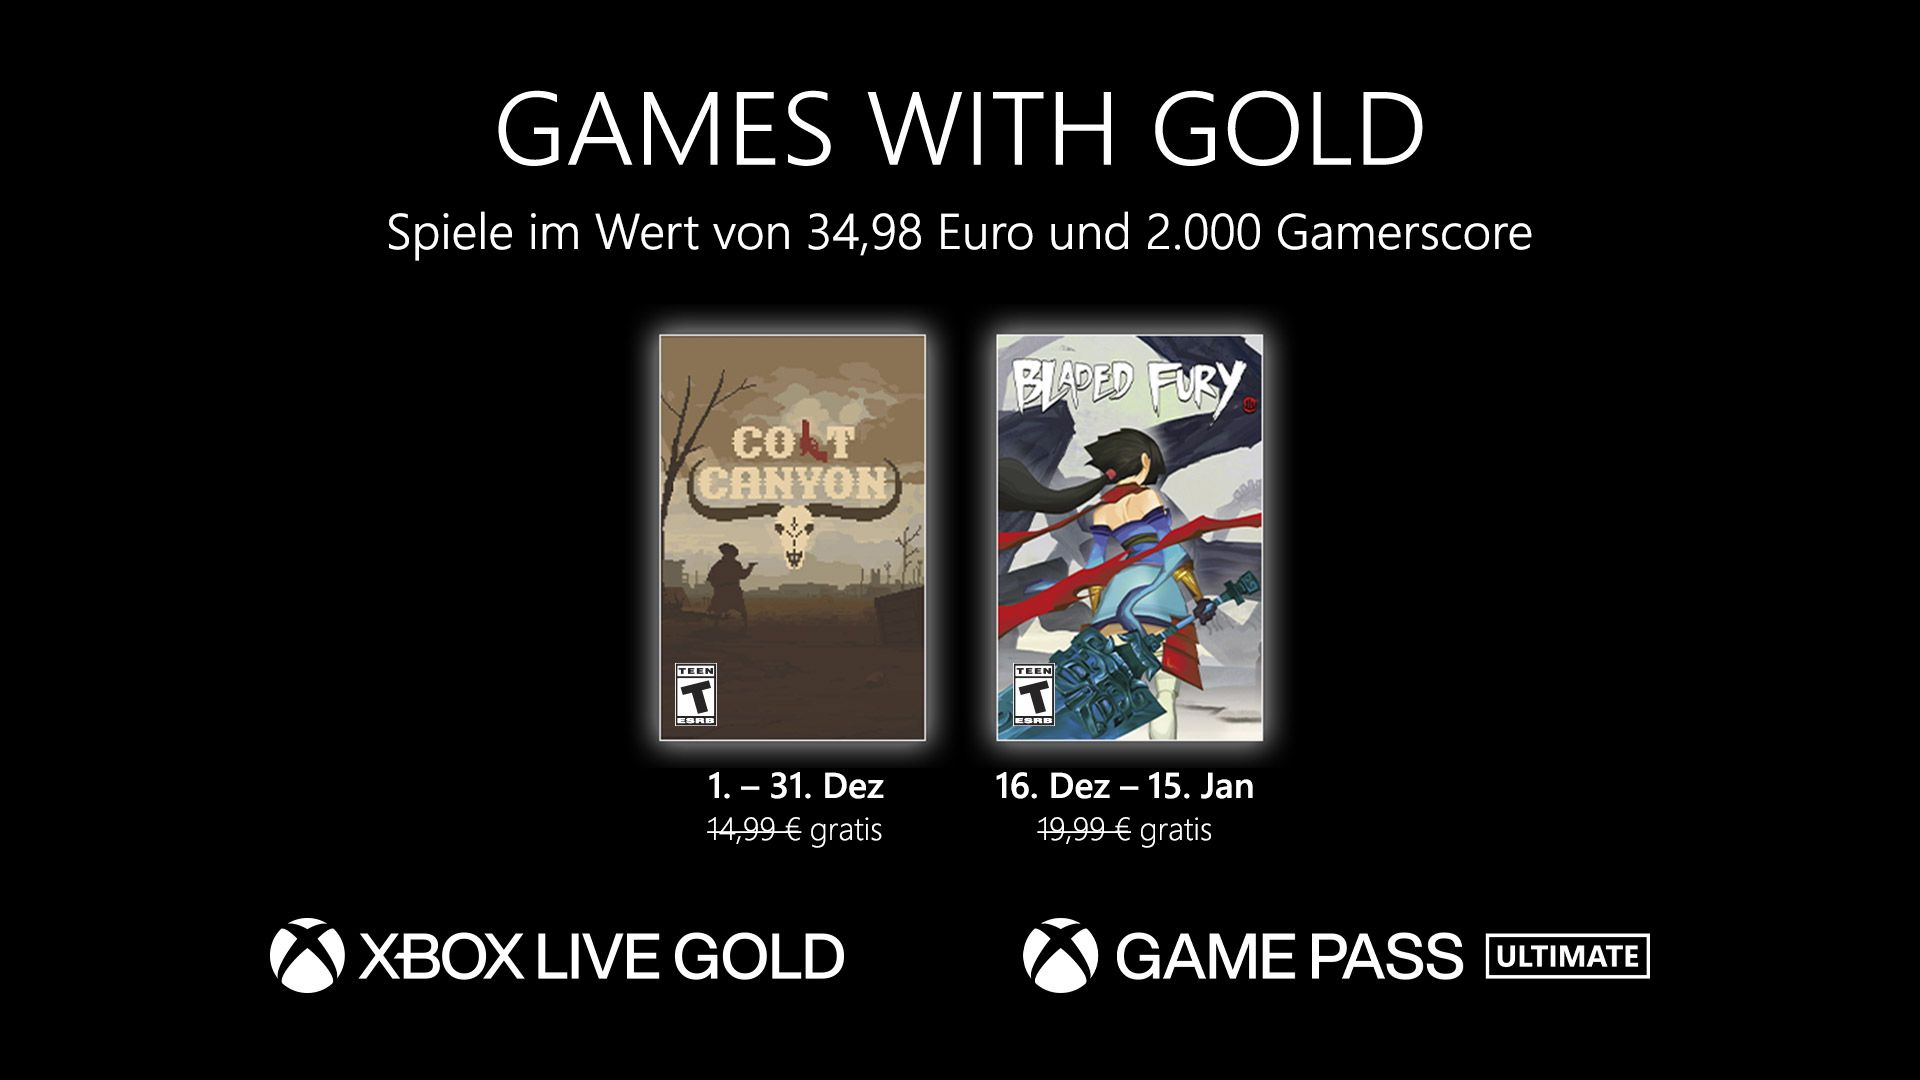 #Games with Gold im Dezember mit Colt Canyon und Bladed Fury